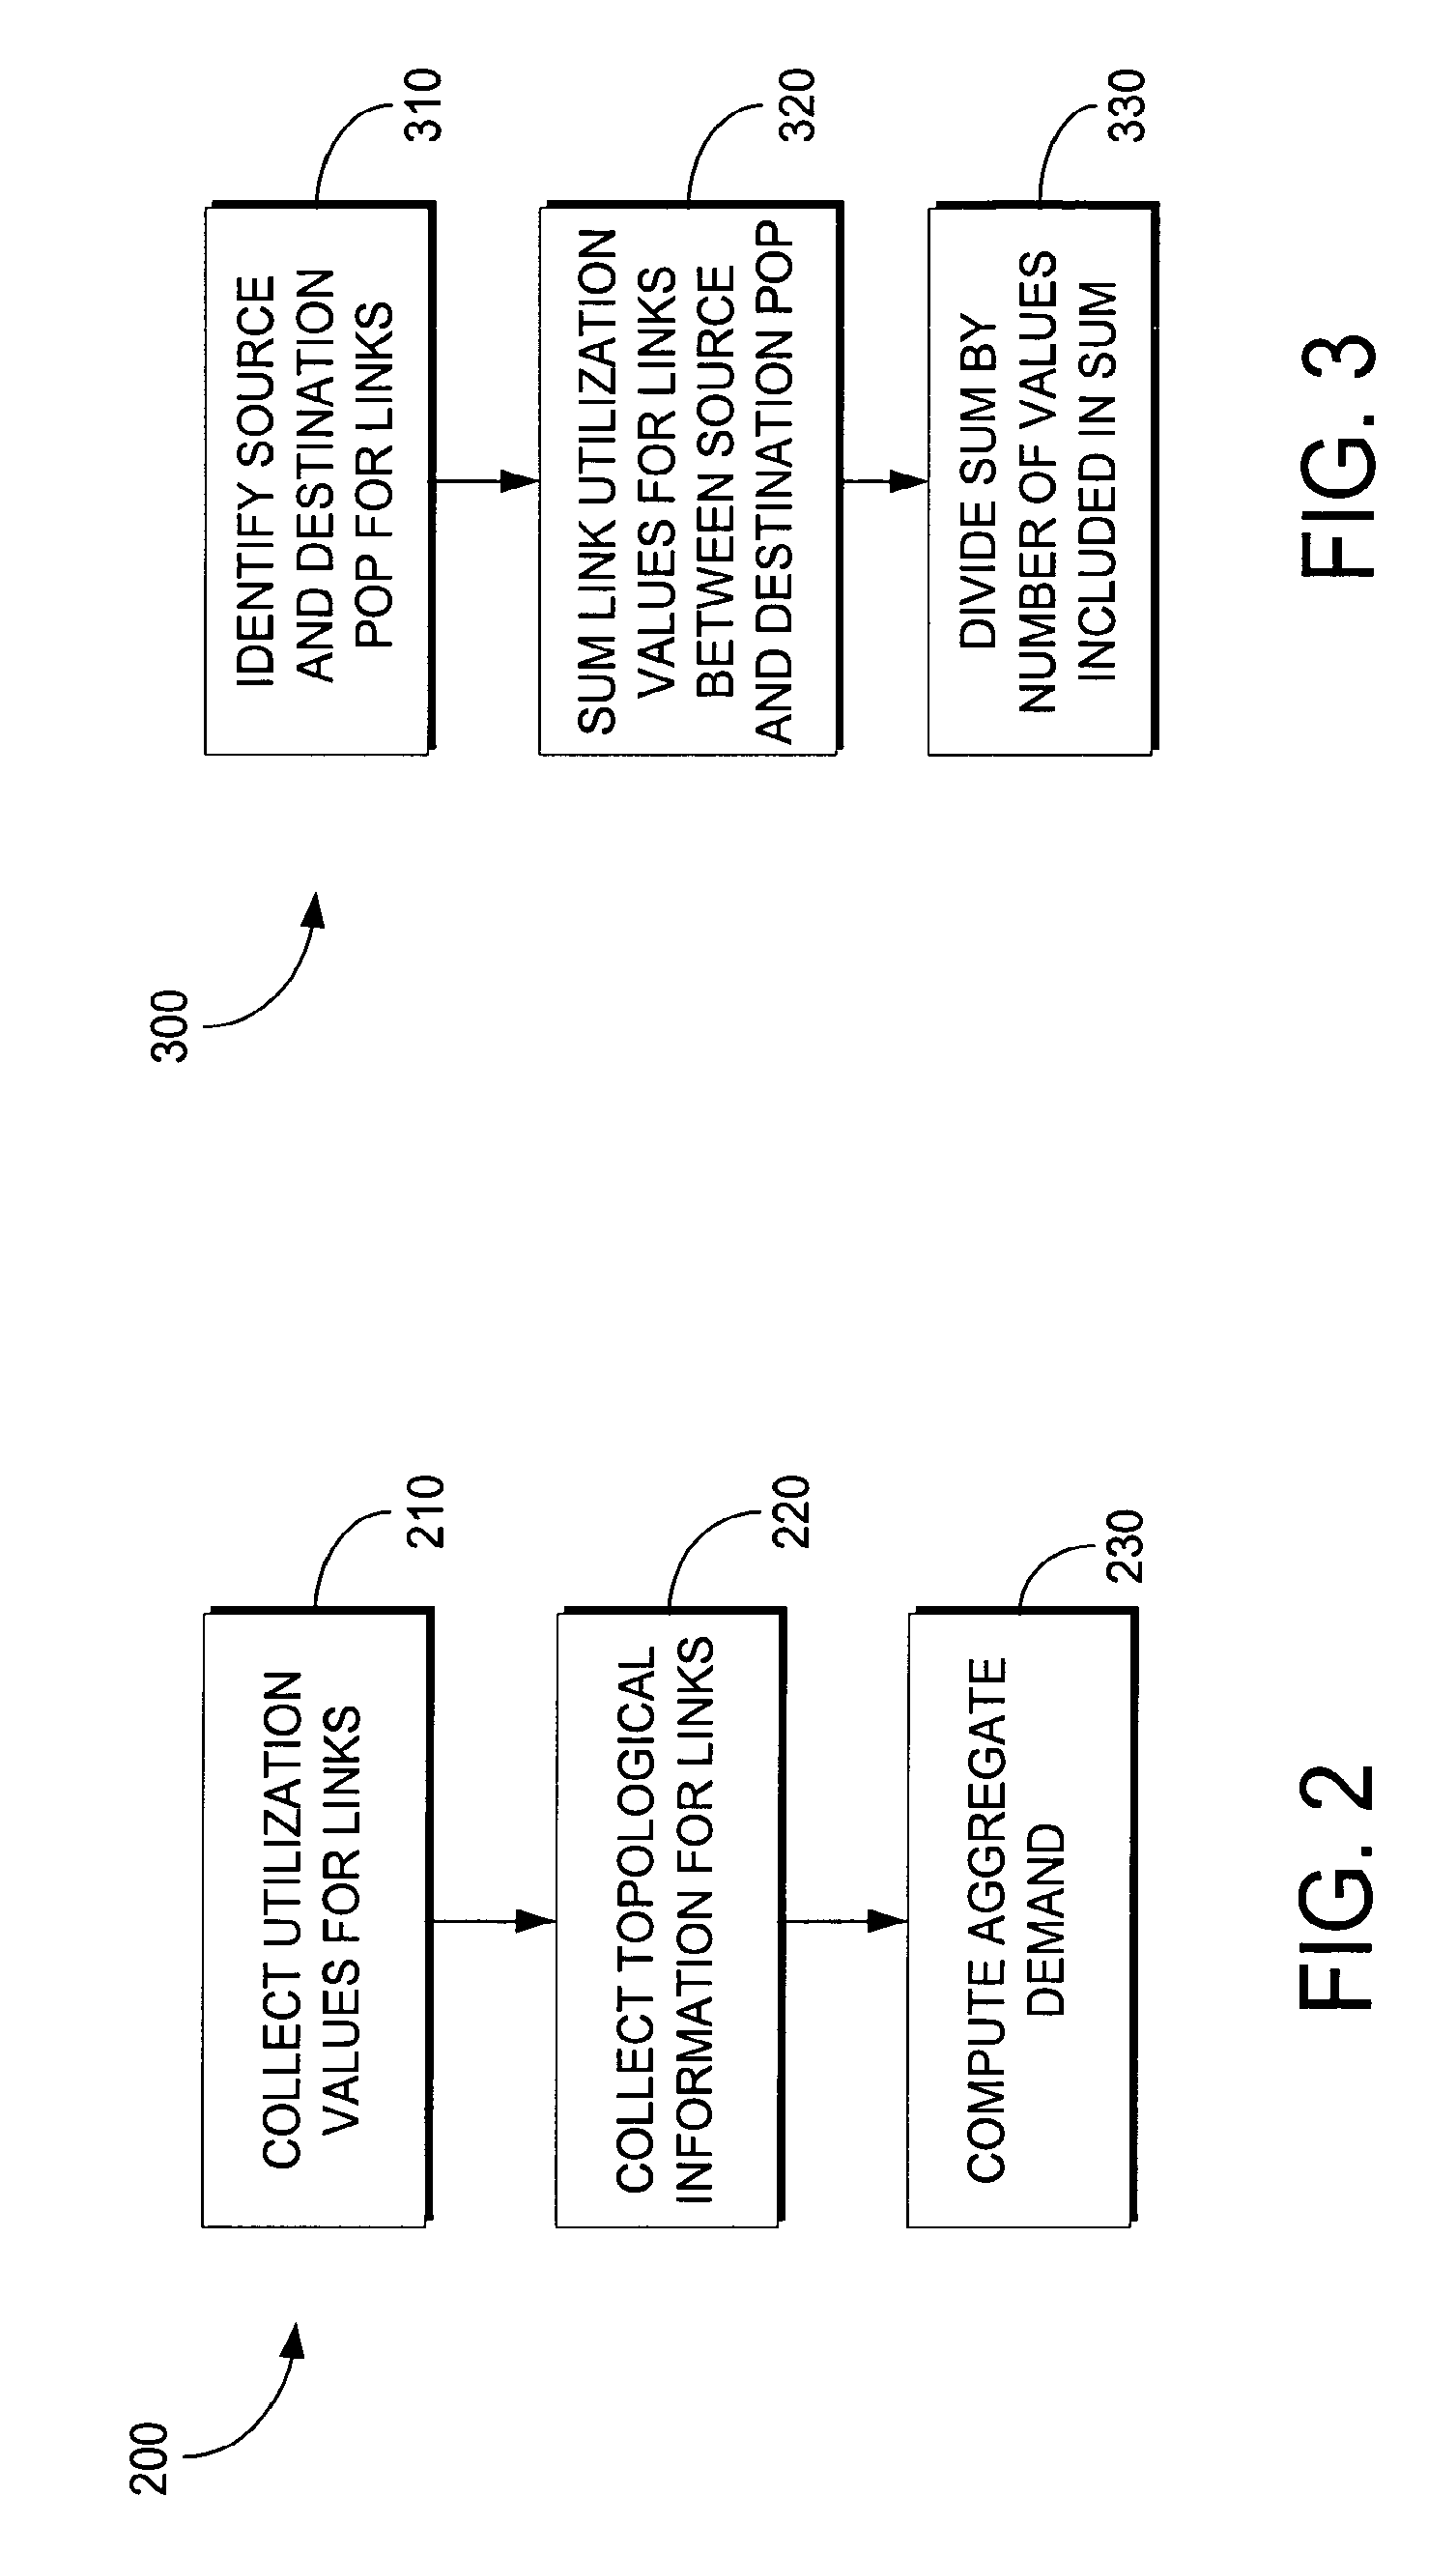 Forecasting link utilization between points of presence in an IP network